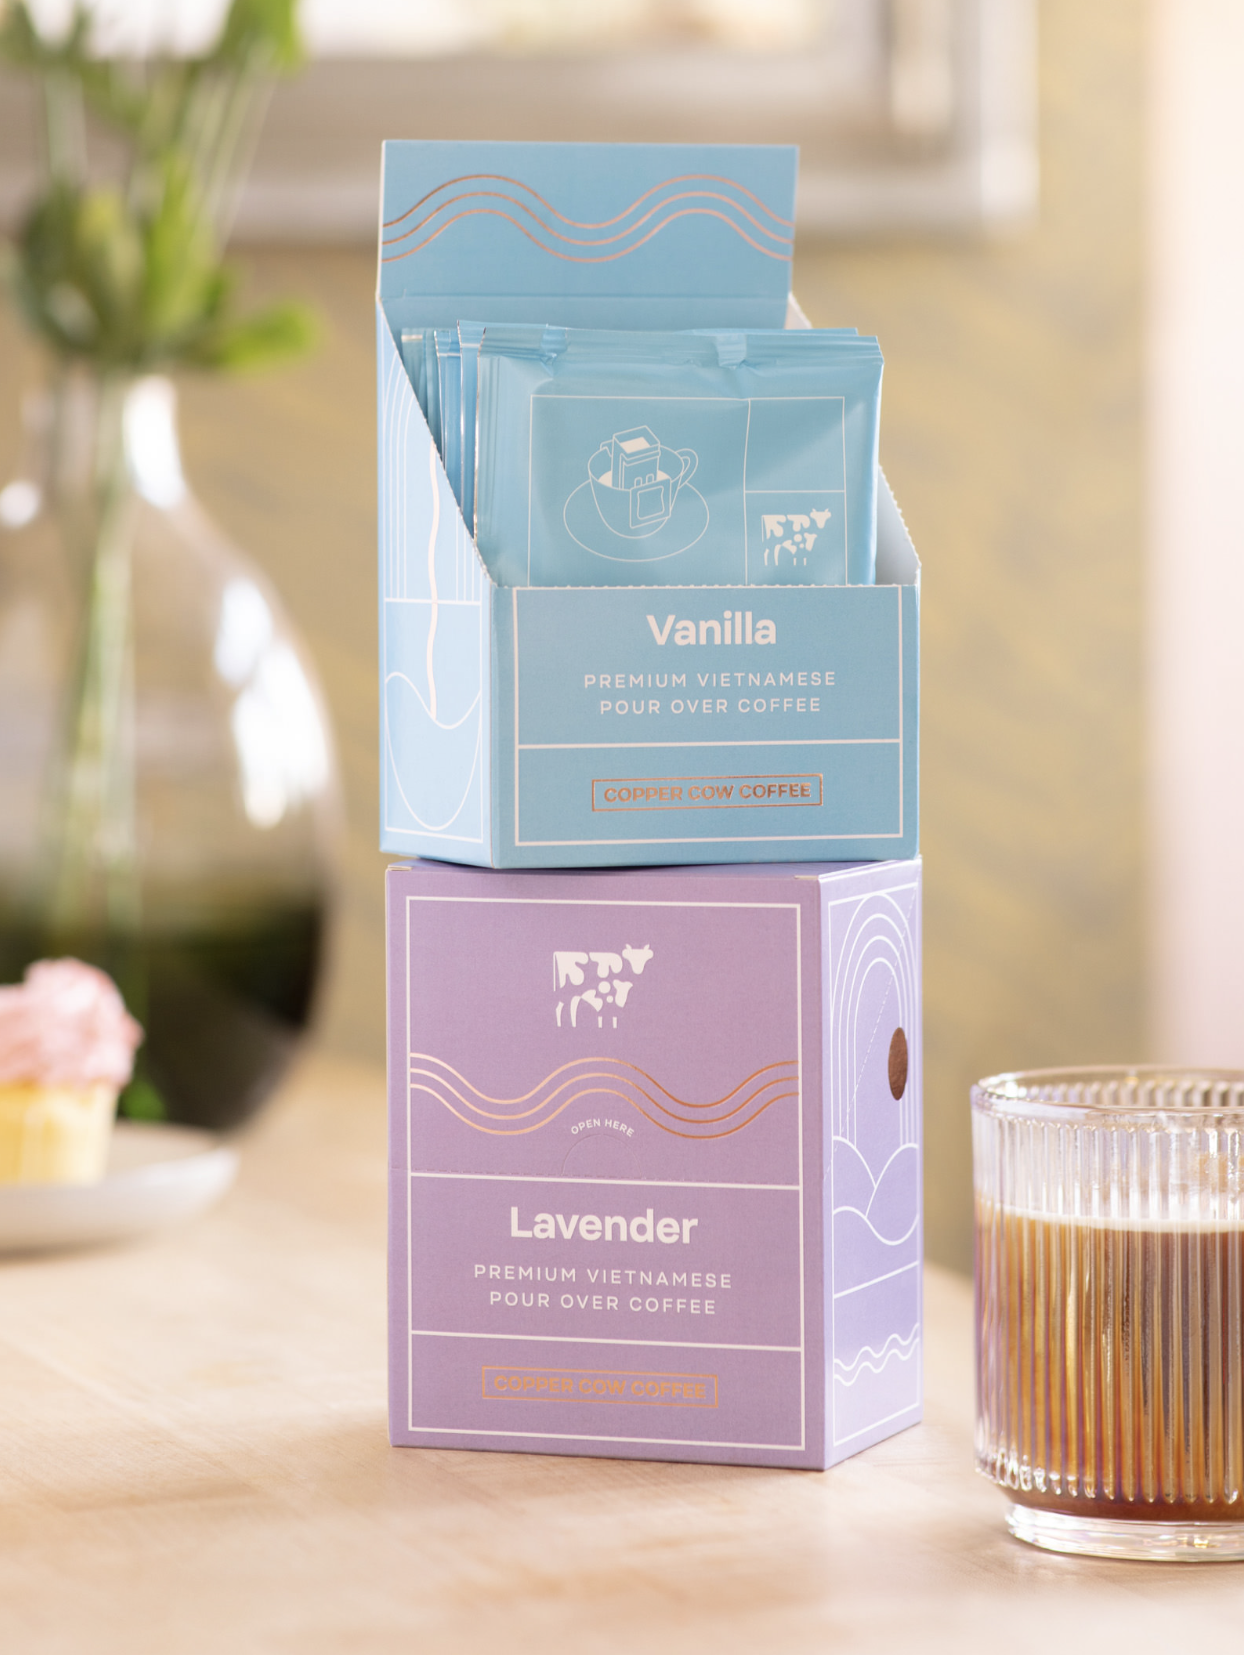 Vanilla and Lavender boxes of pour over coffee on table.